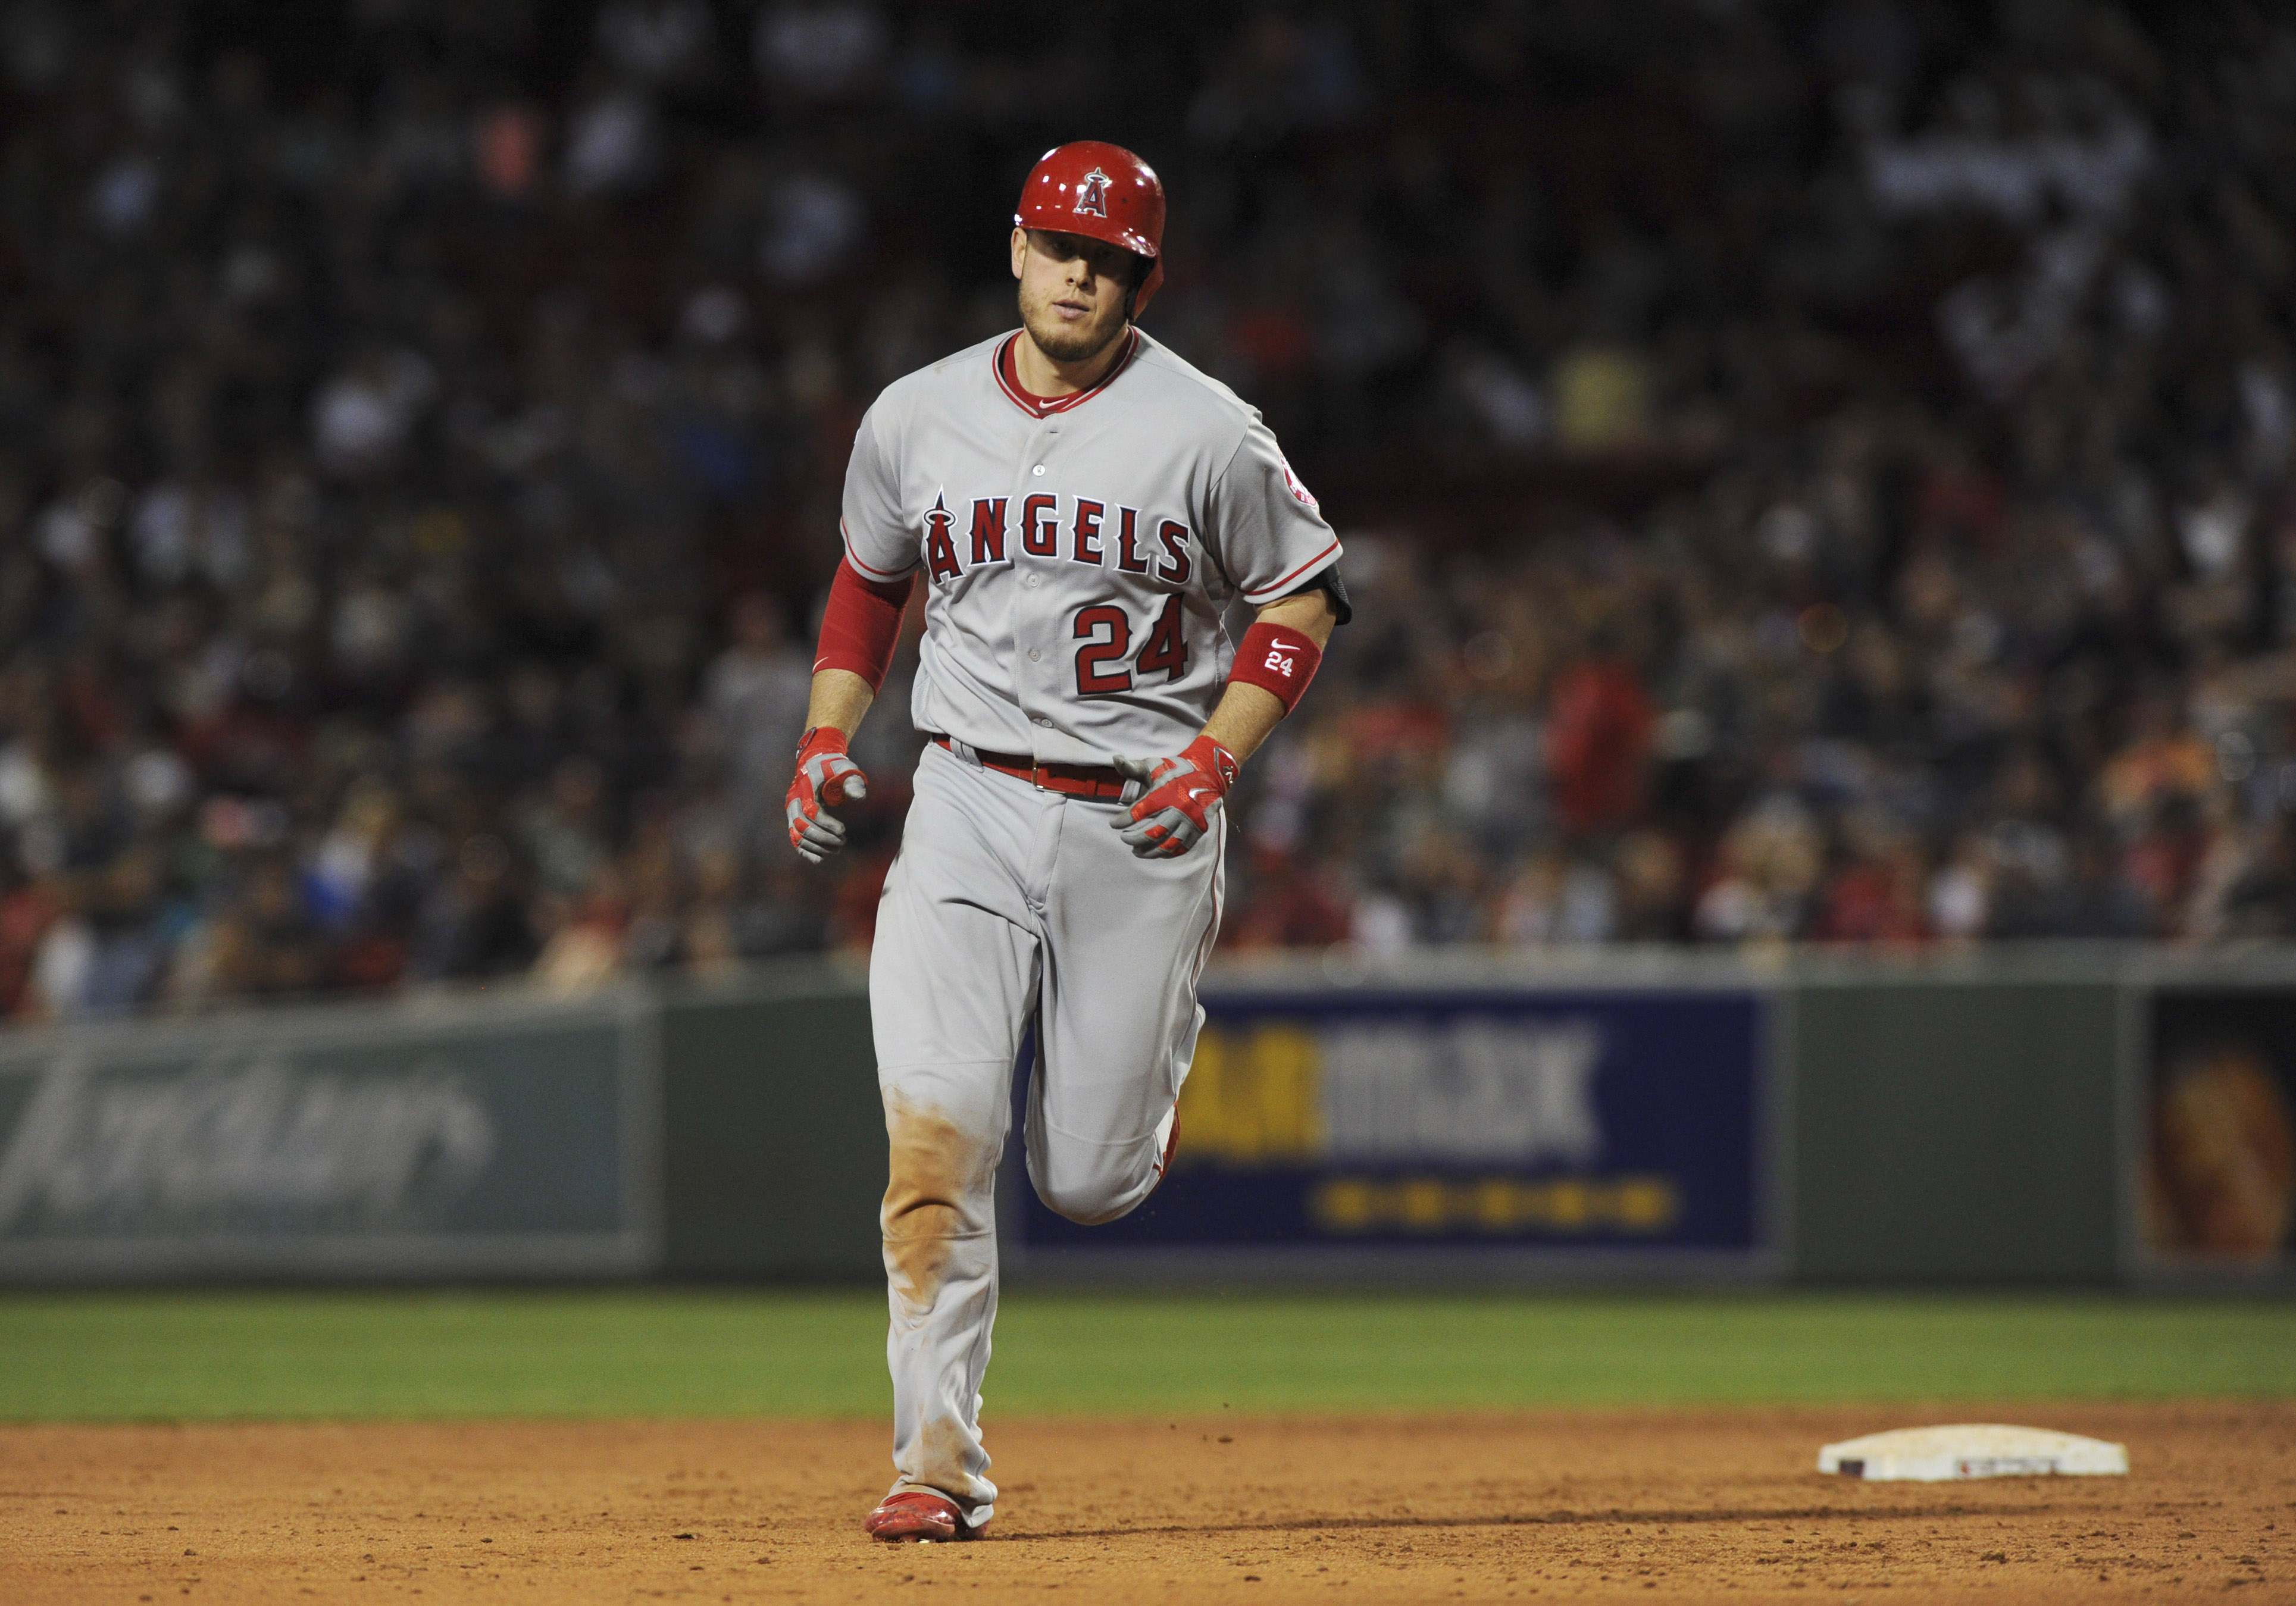 Rays acquire C.J. Cron from Angels - NBC Sports